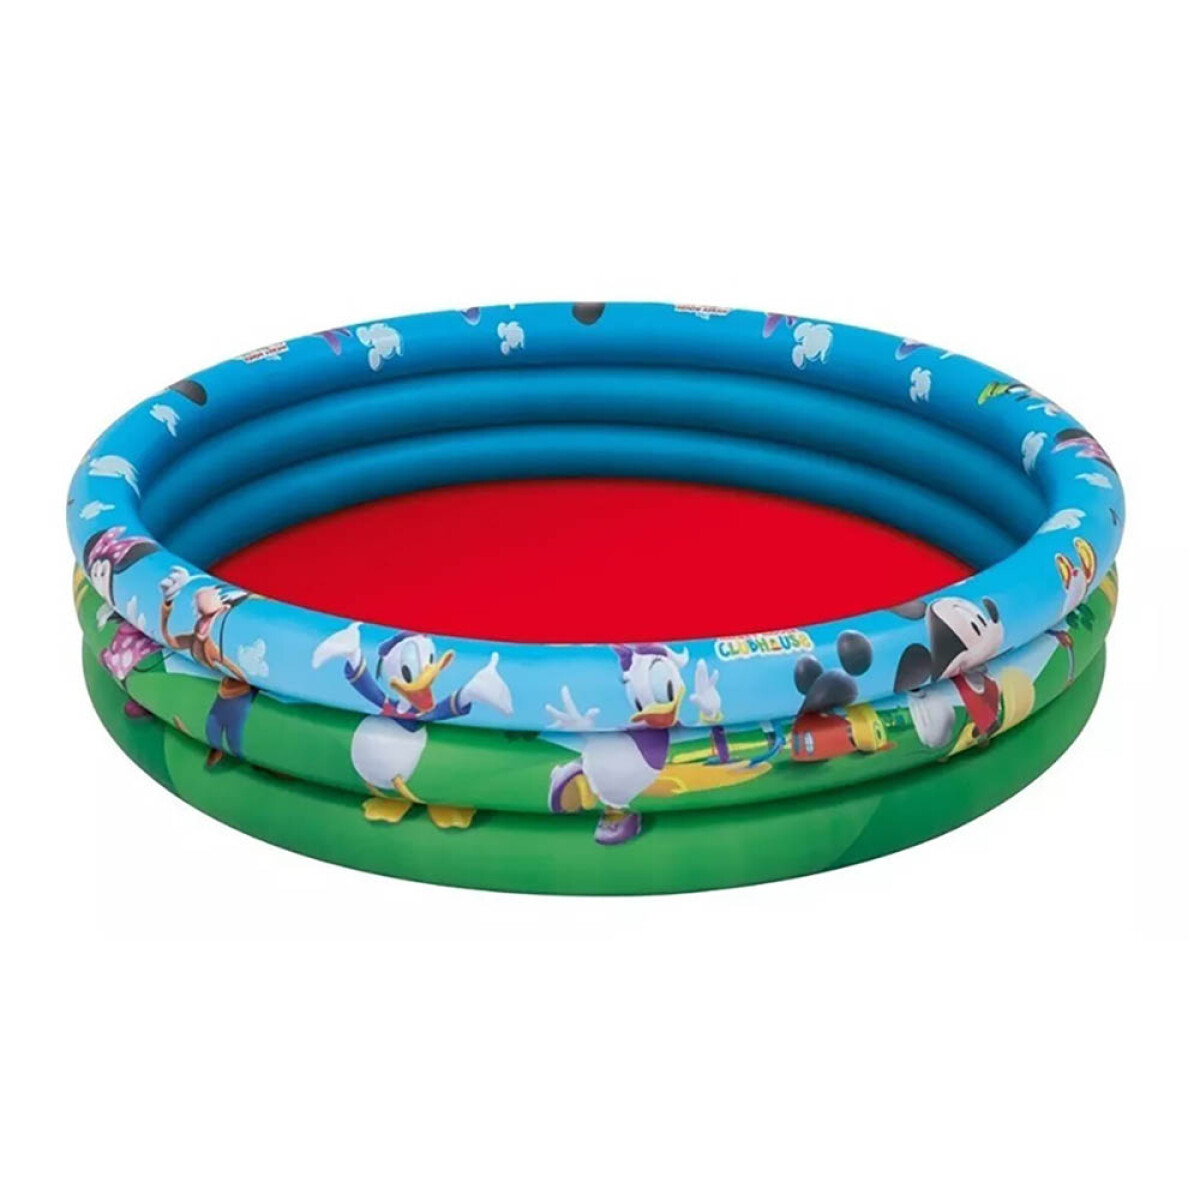 Piscina Inflable Bestway 140 Lts Mickey 